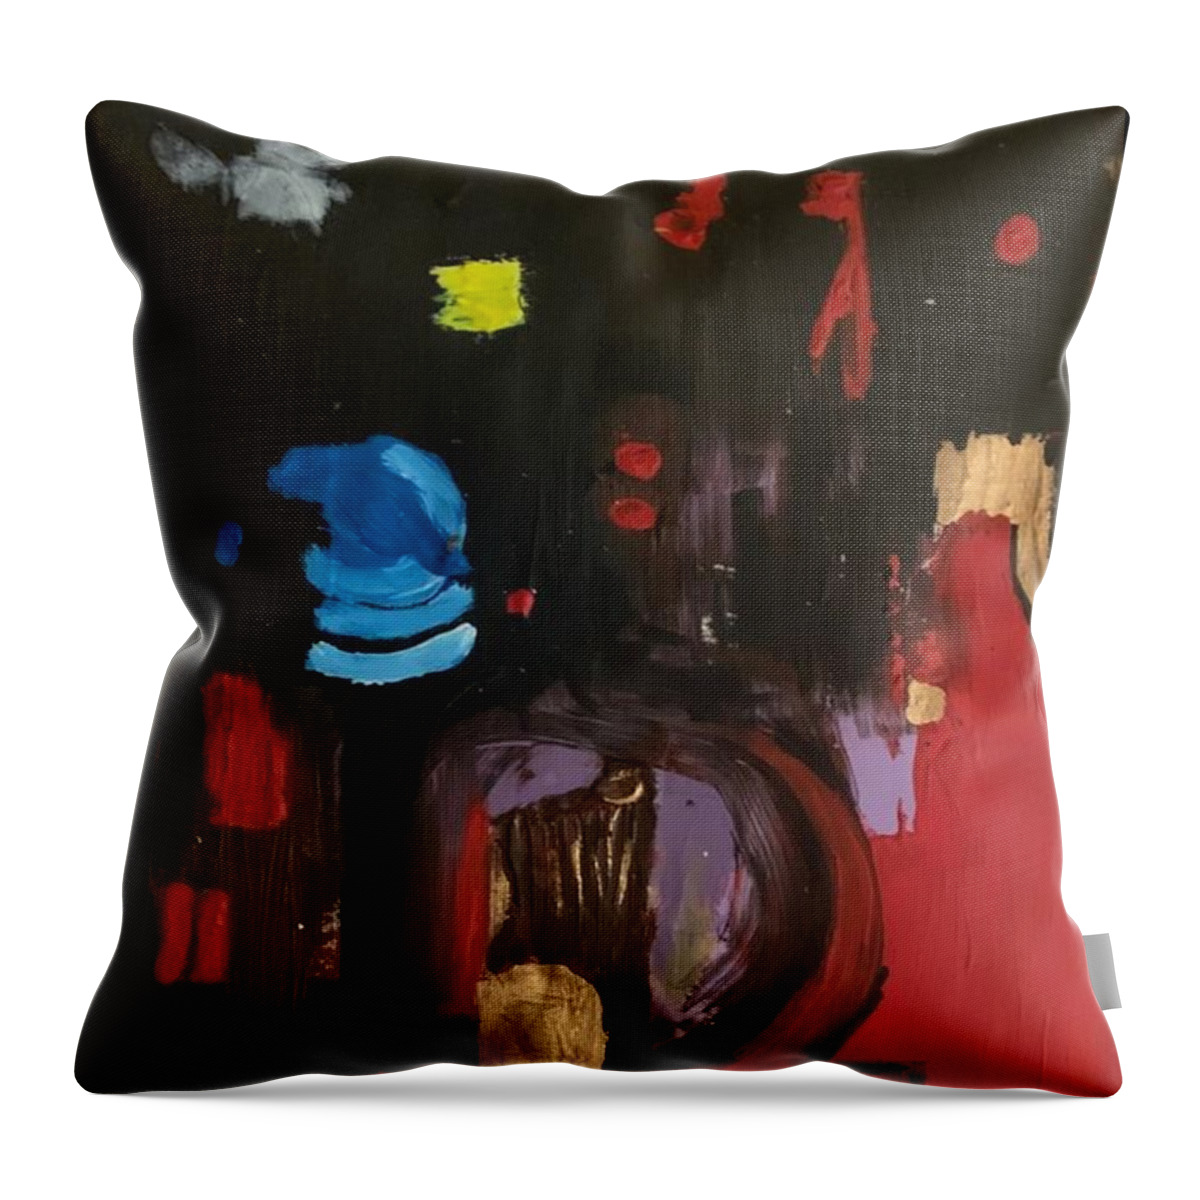 Abstract Throw Pillow featuring the painting Riotous, a mysterious abstract art piece by Denise Morgan